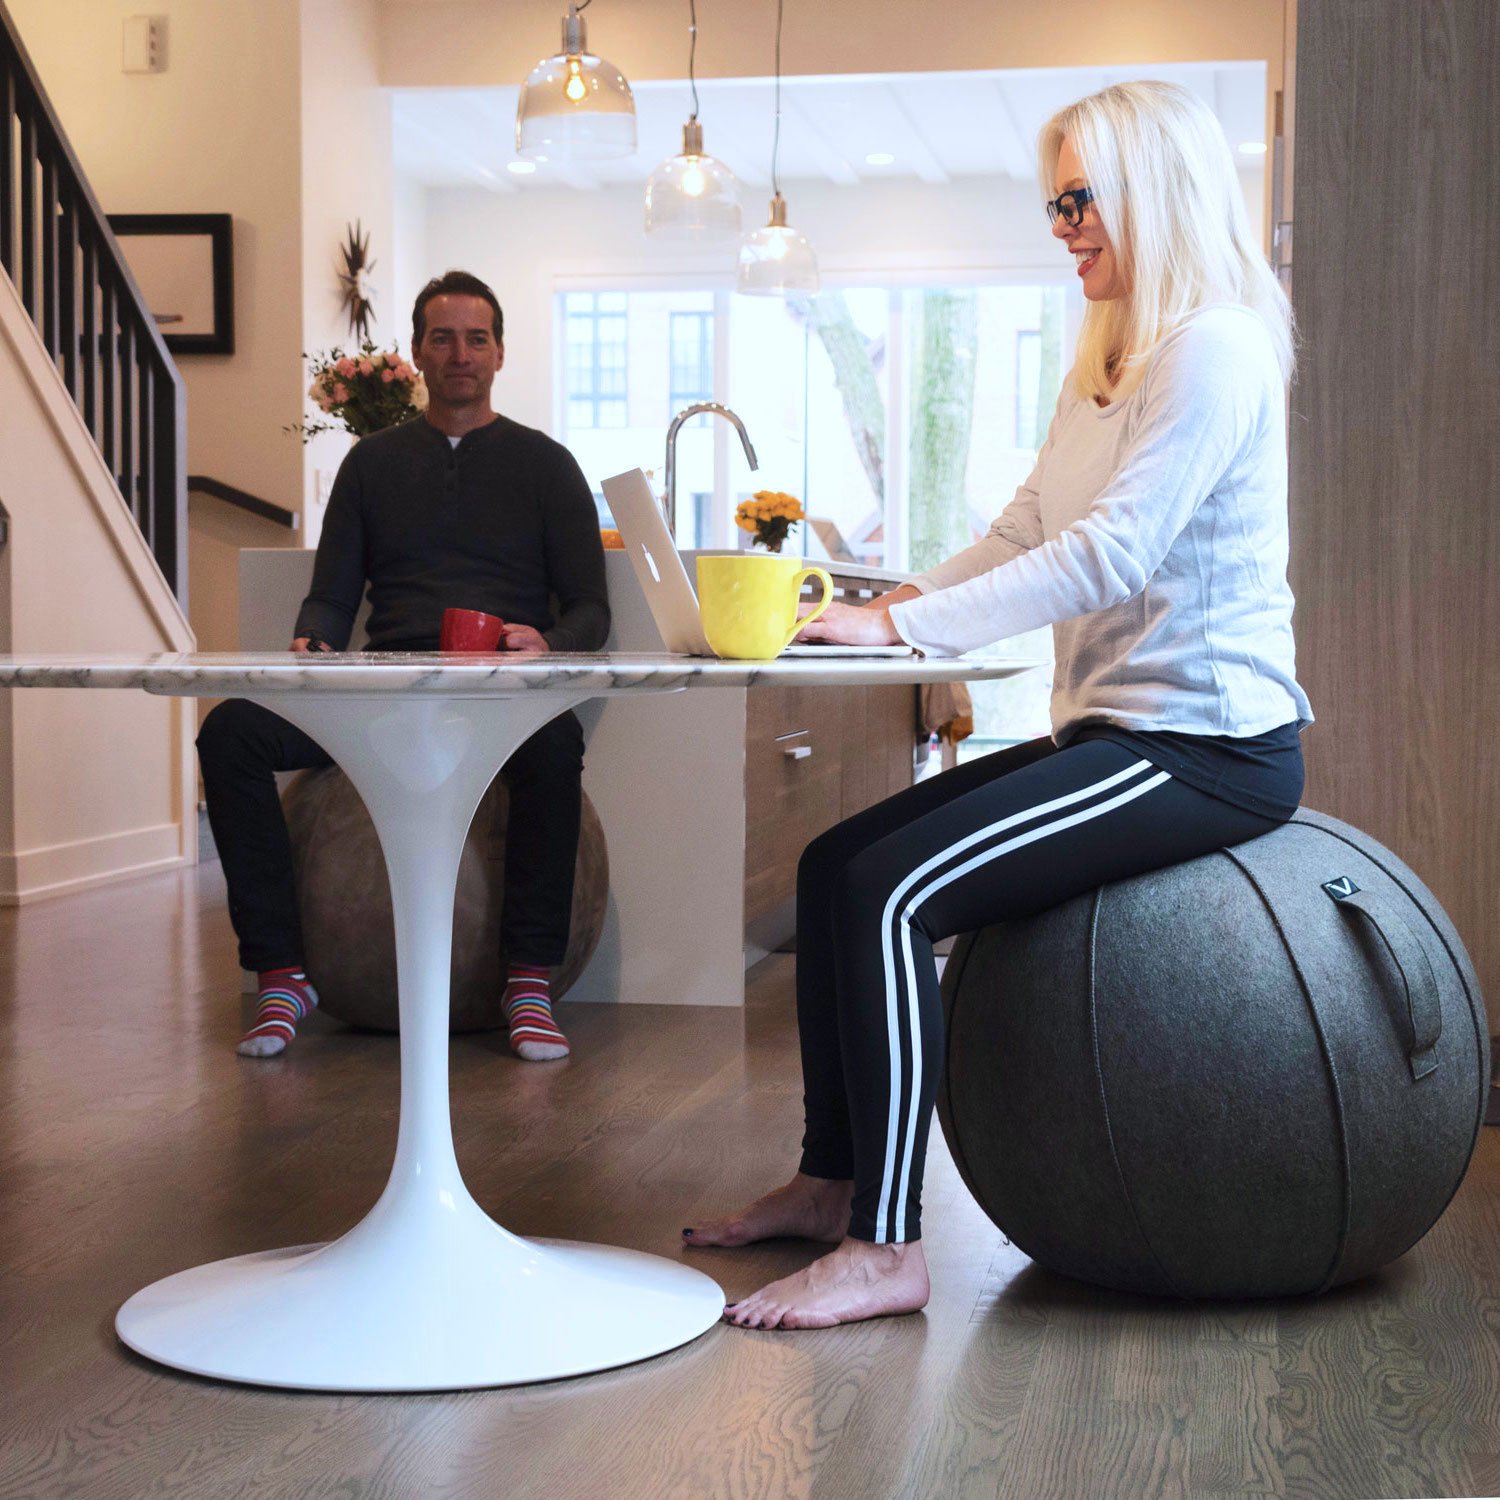 Sitting Ball Chair for Office and Home